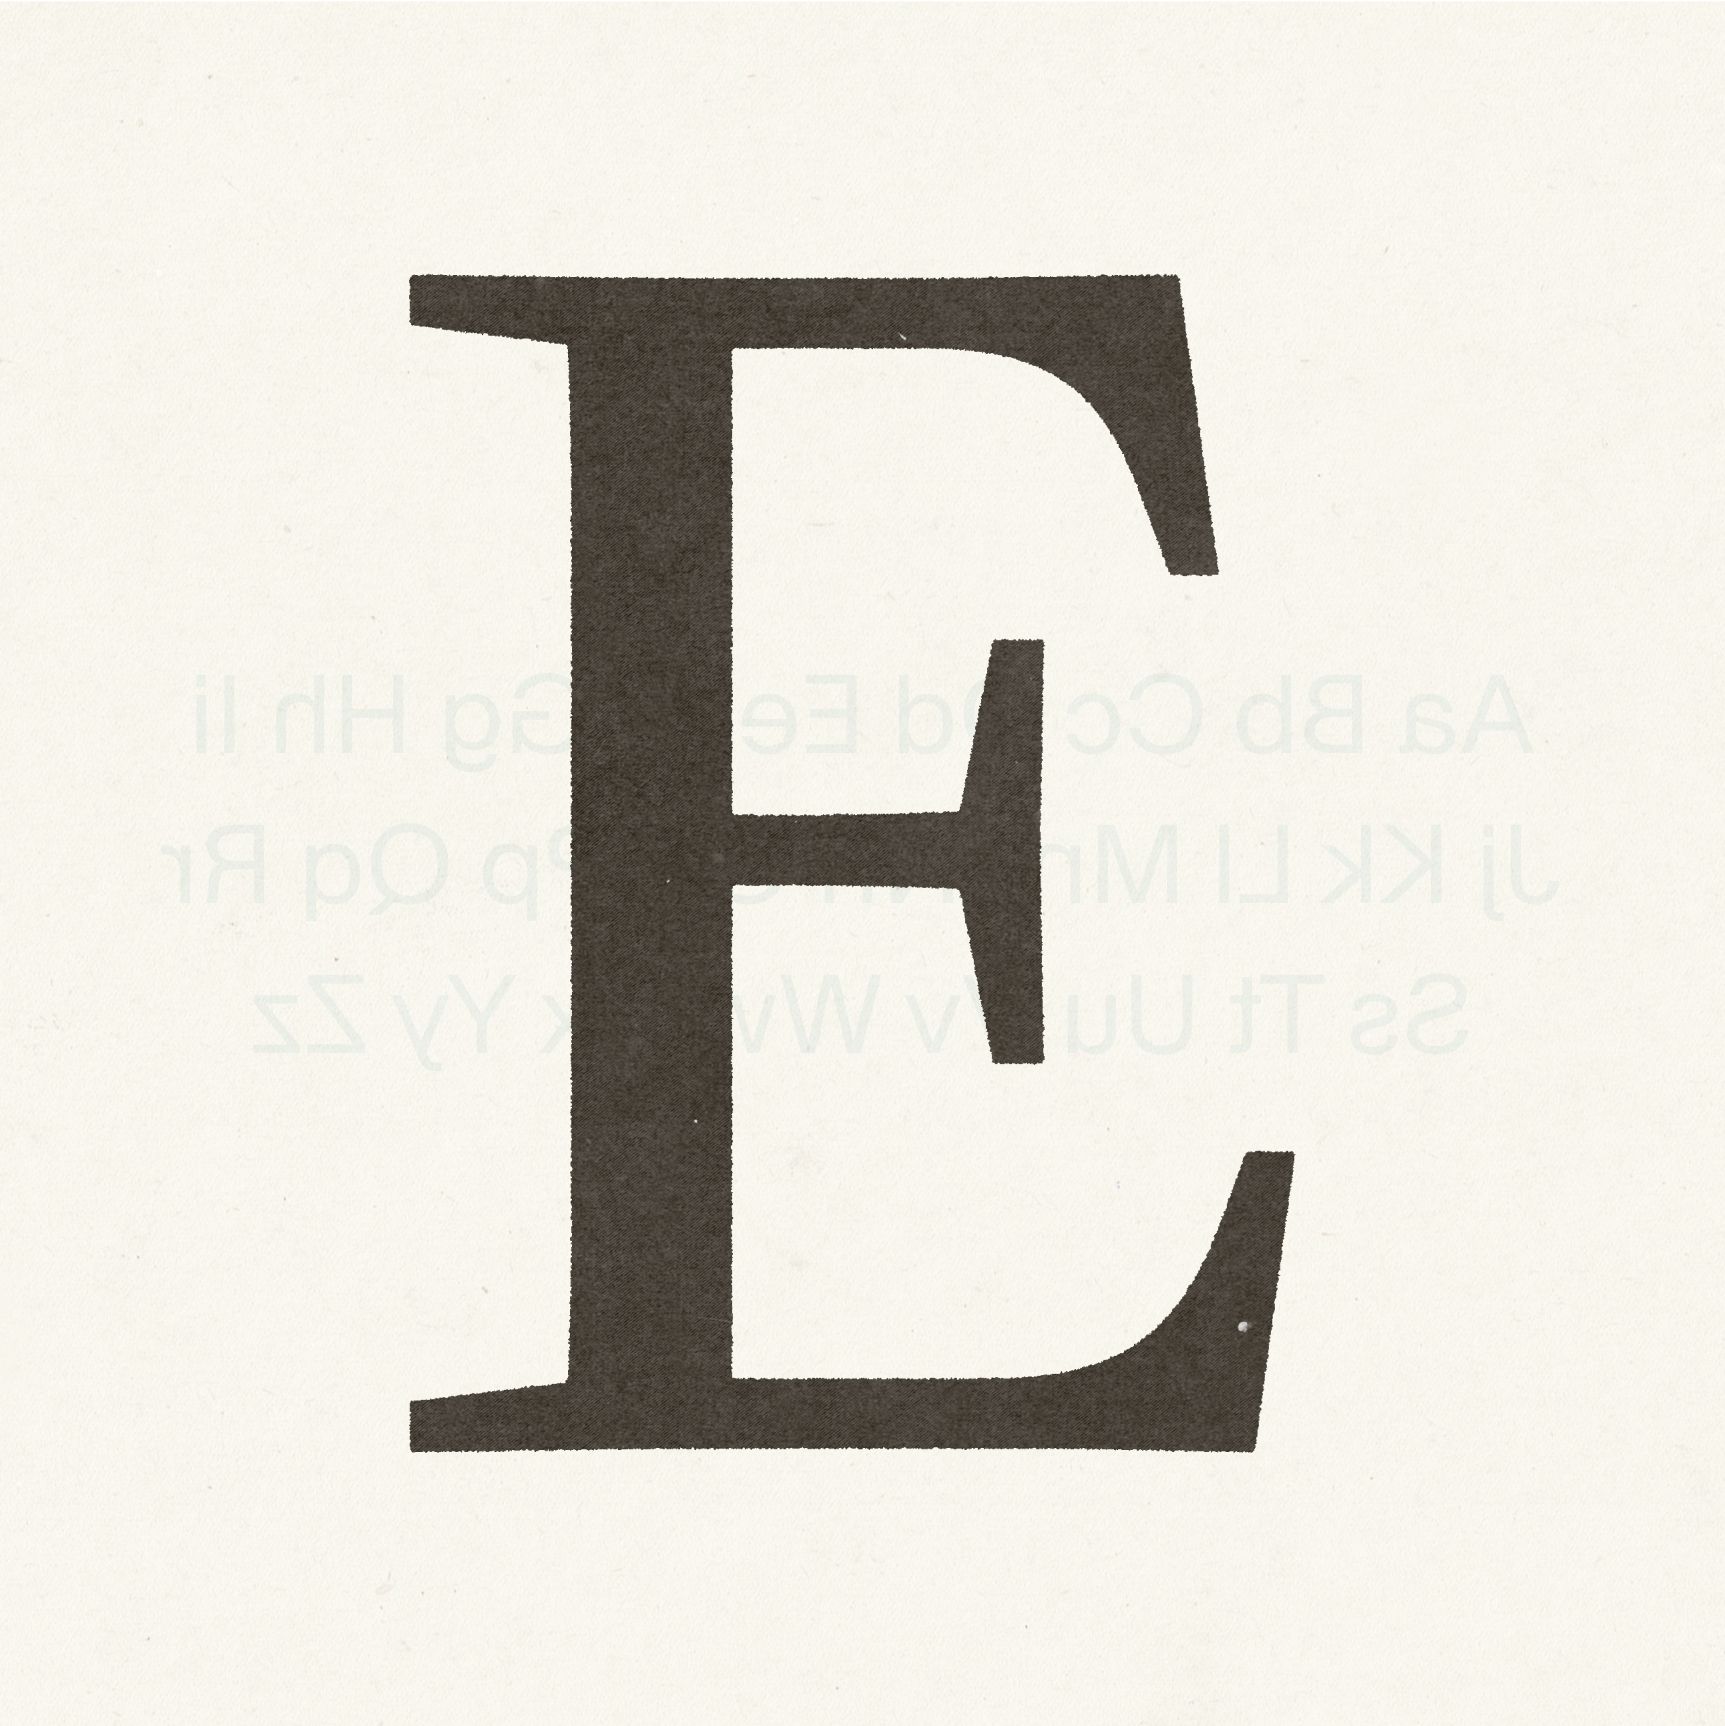 Crop closeup of a letter 'E' on paper